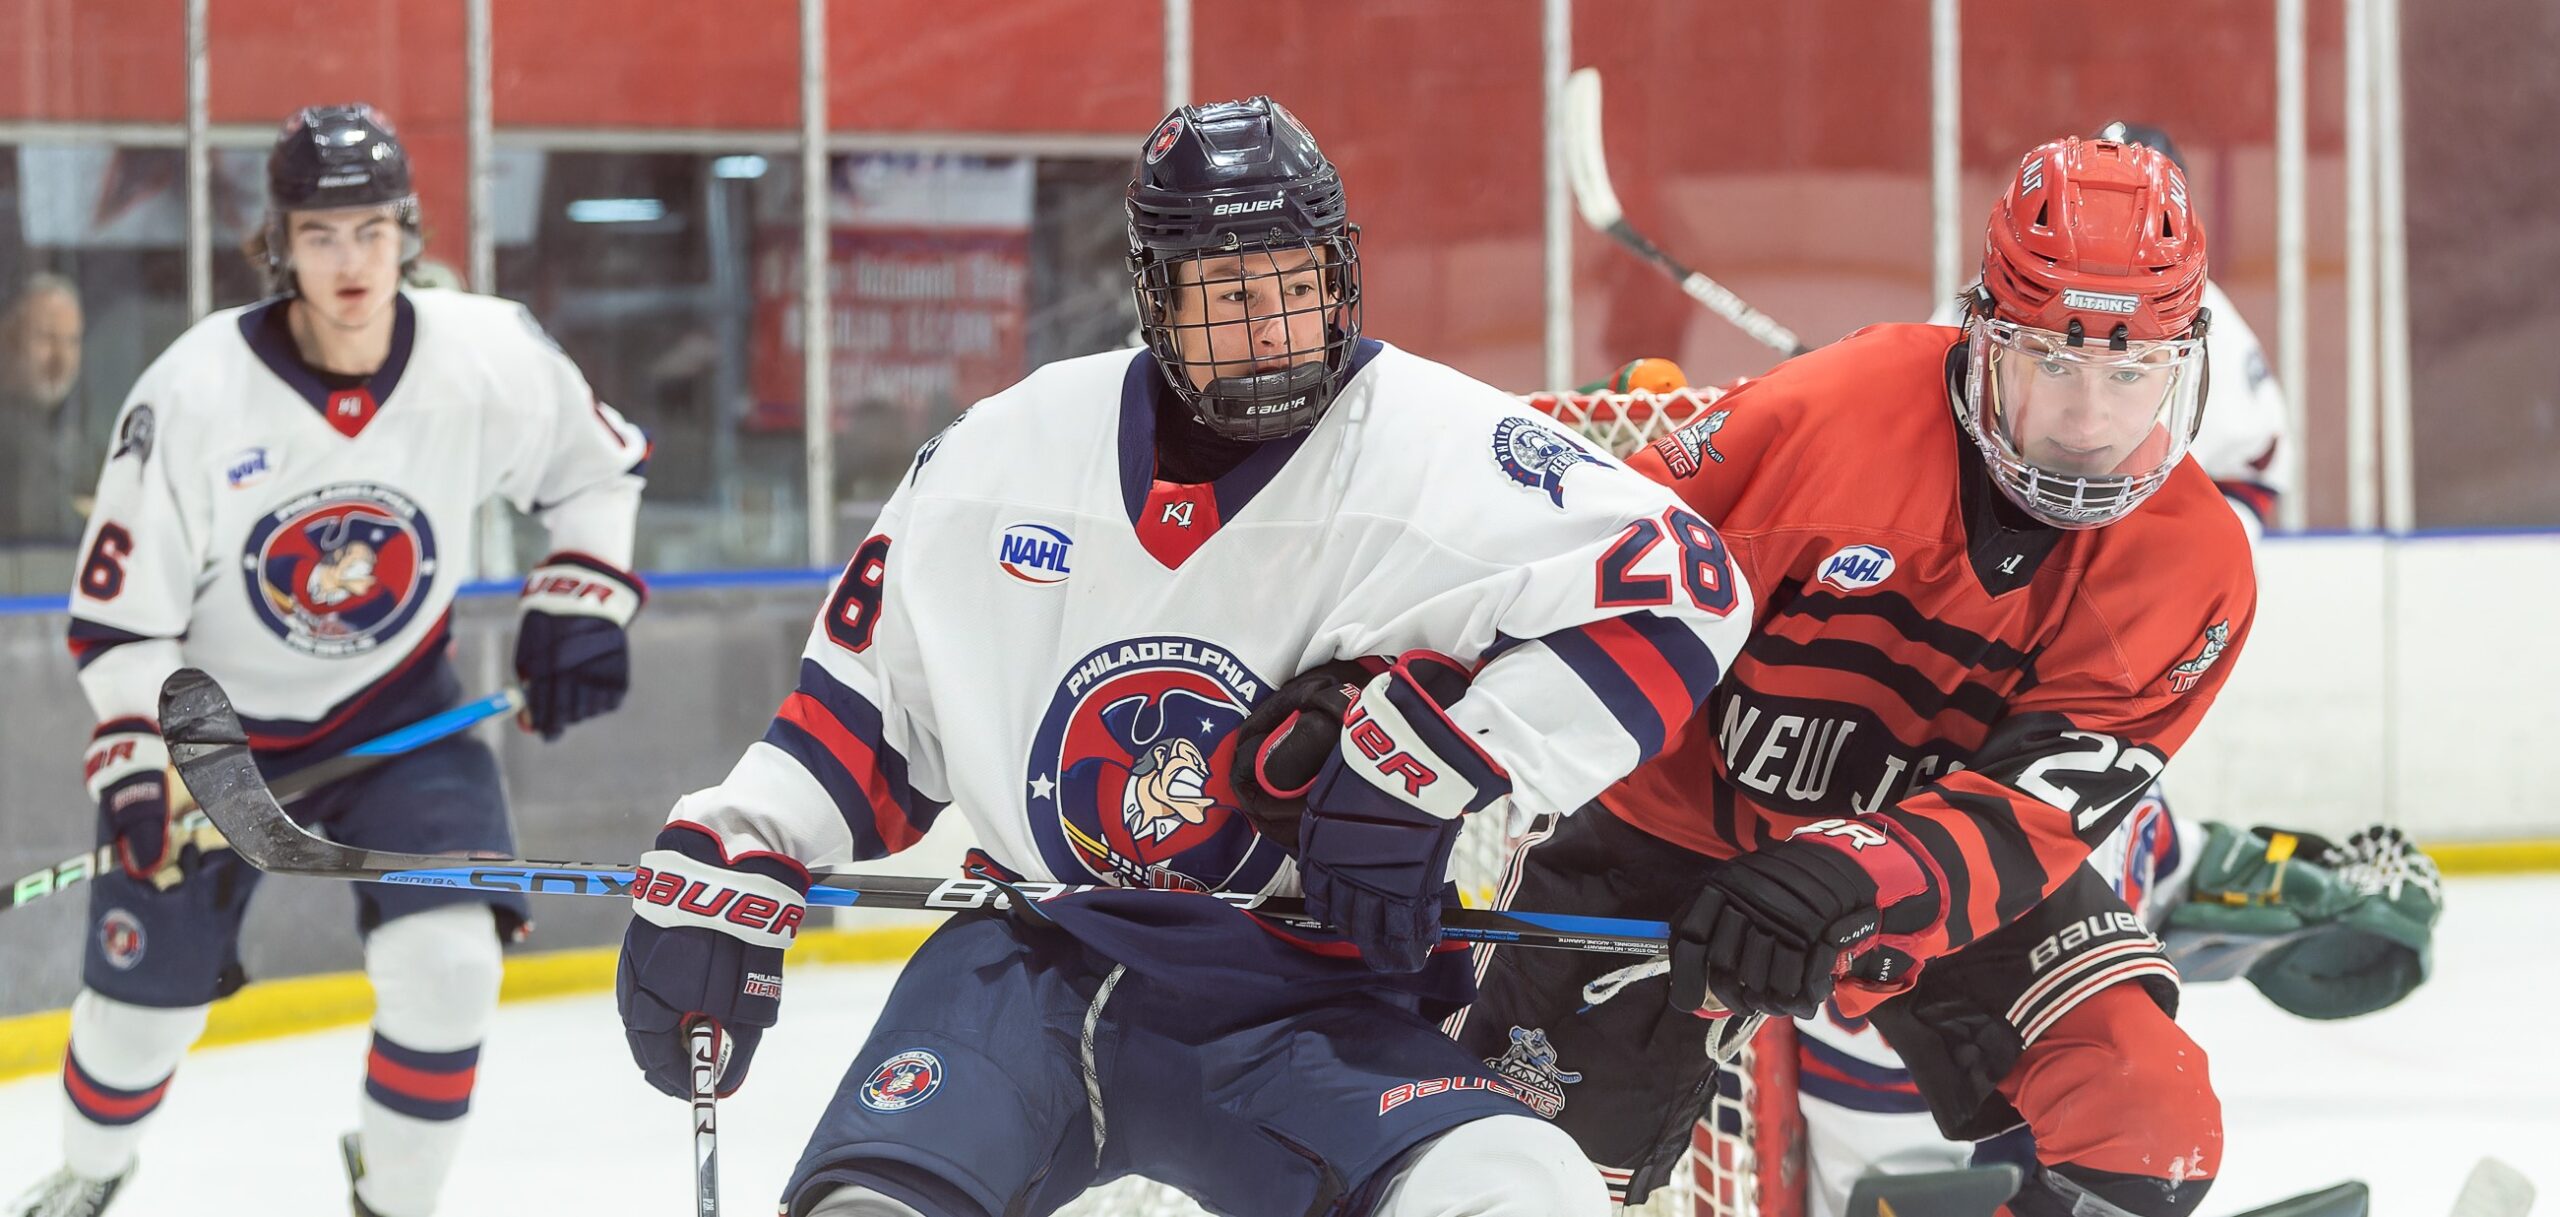 Second period dooms Rebels in 5 – 1 Loss to Titans